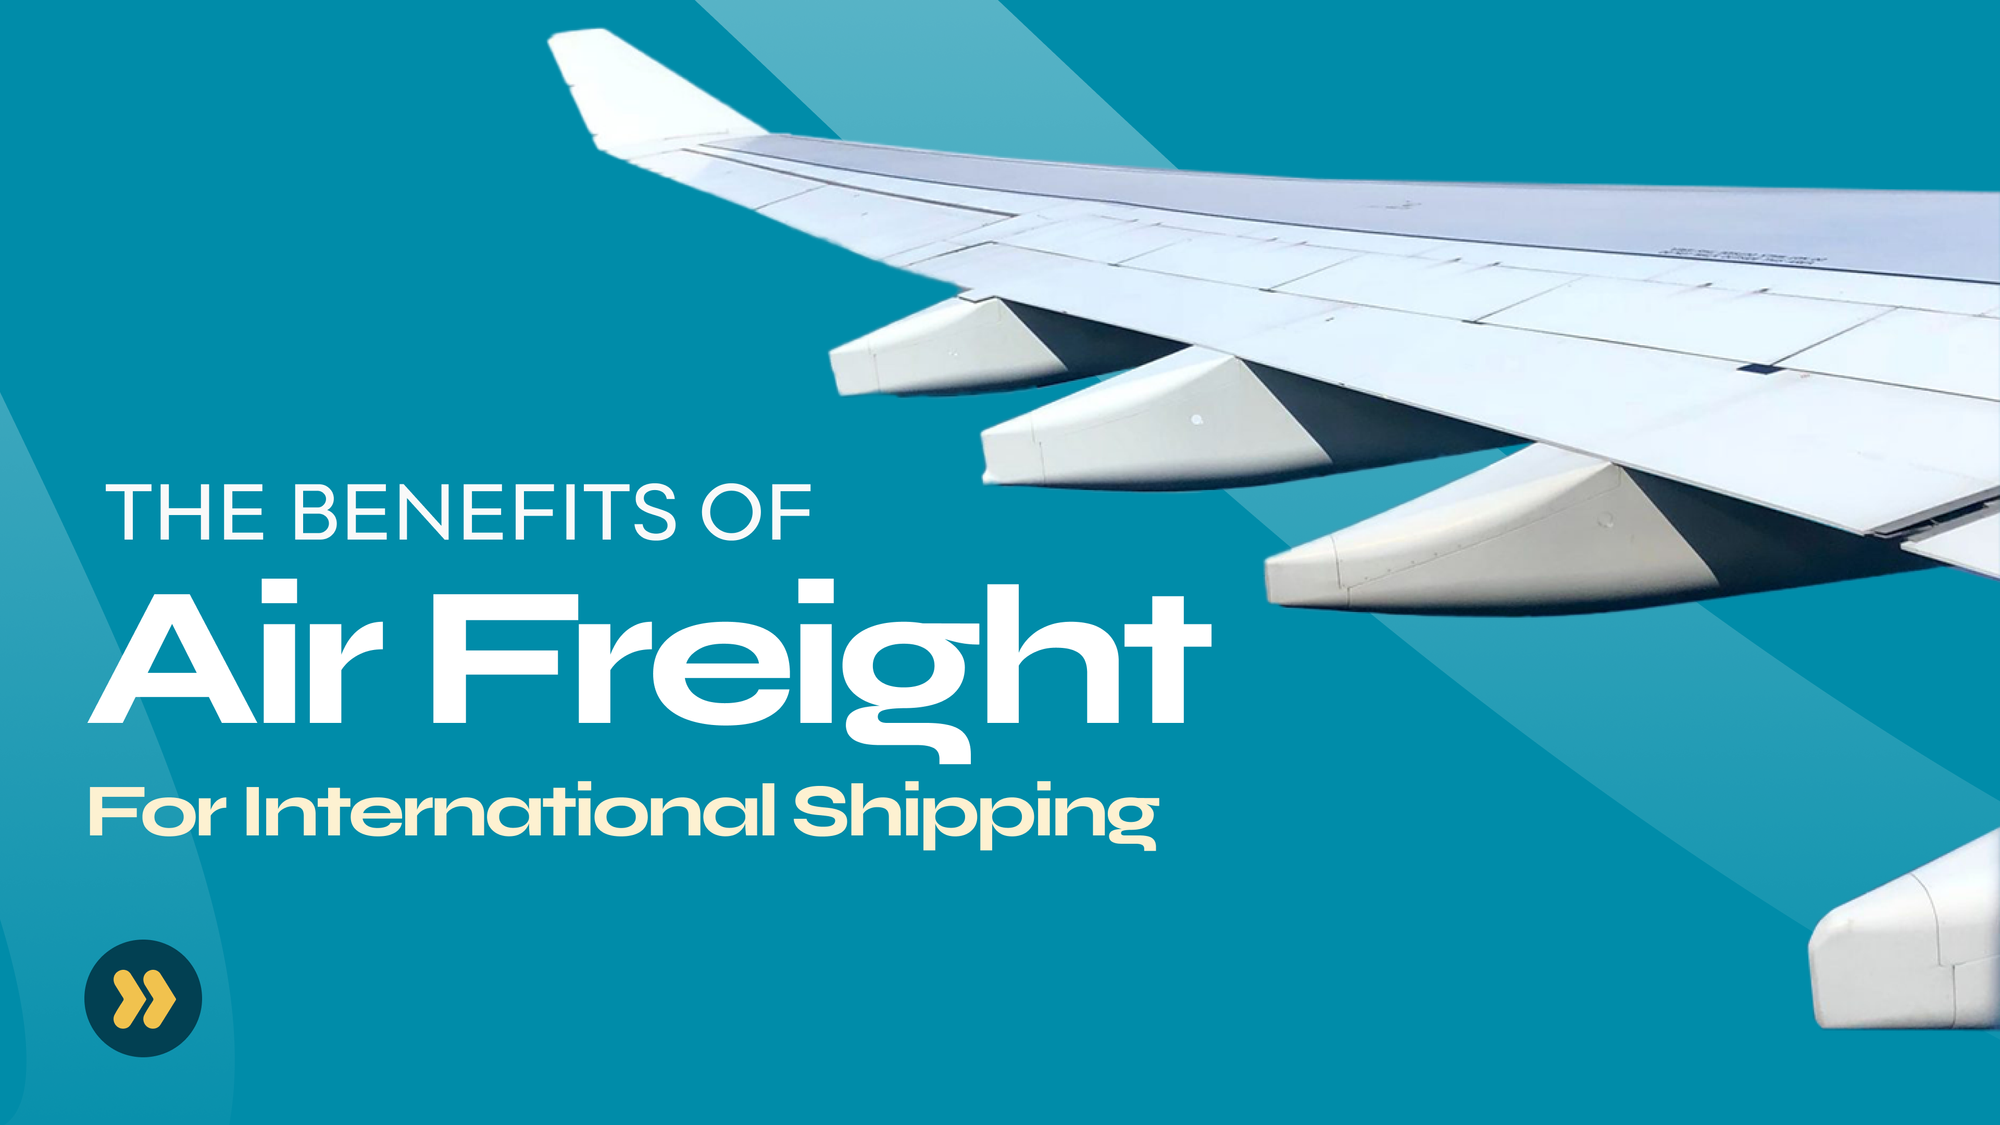 The Benefits of Air Freight for International Shipping